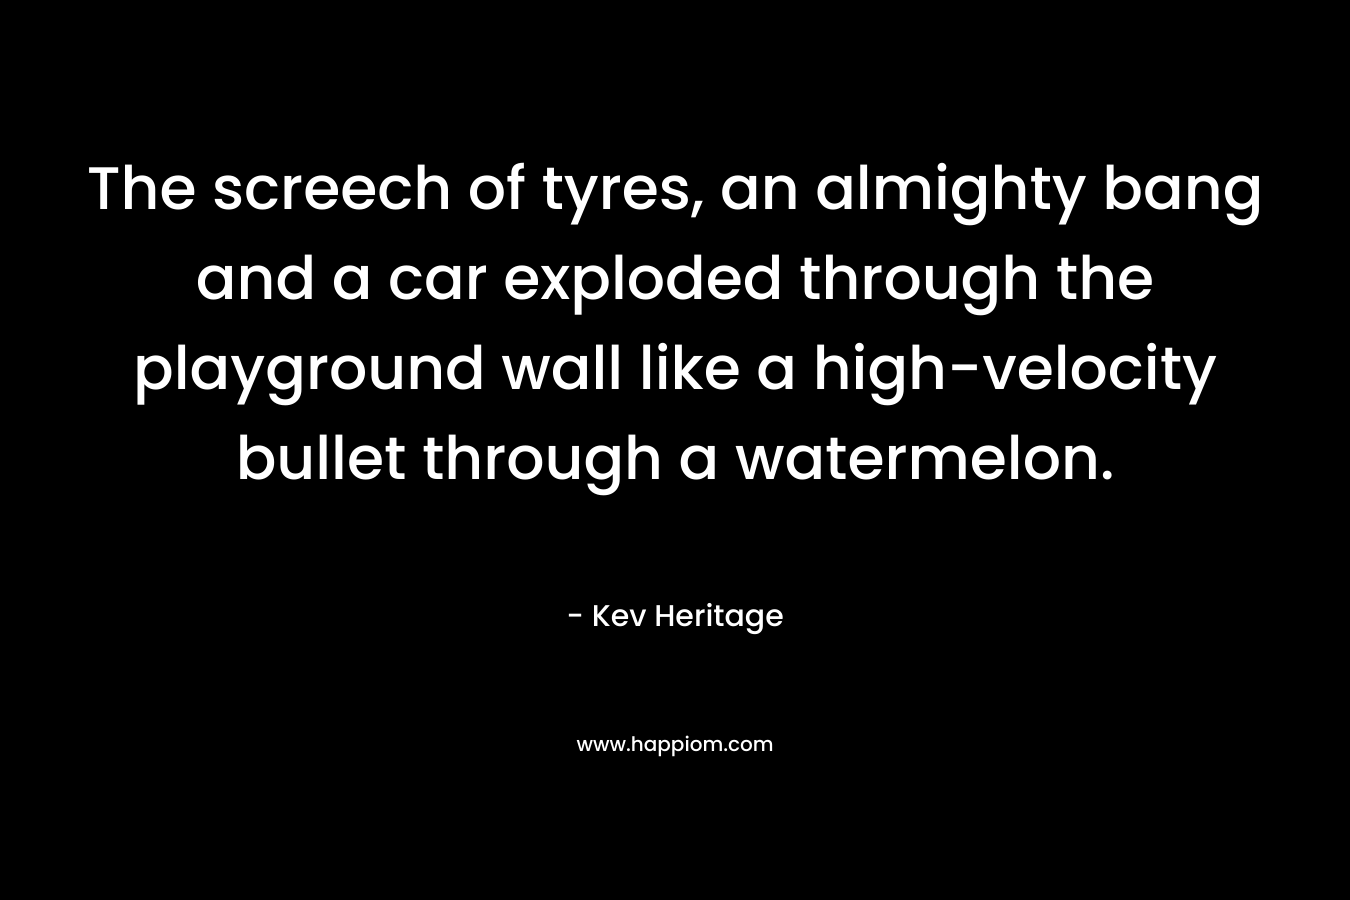 The screech of tyres, an almighty bang and a car exploded through the playground wall like a high-velocity bullet through a watermelon. – Kev Heritage